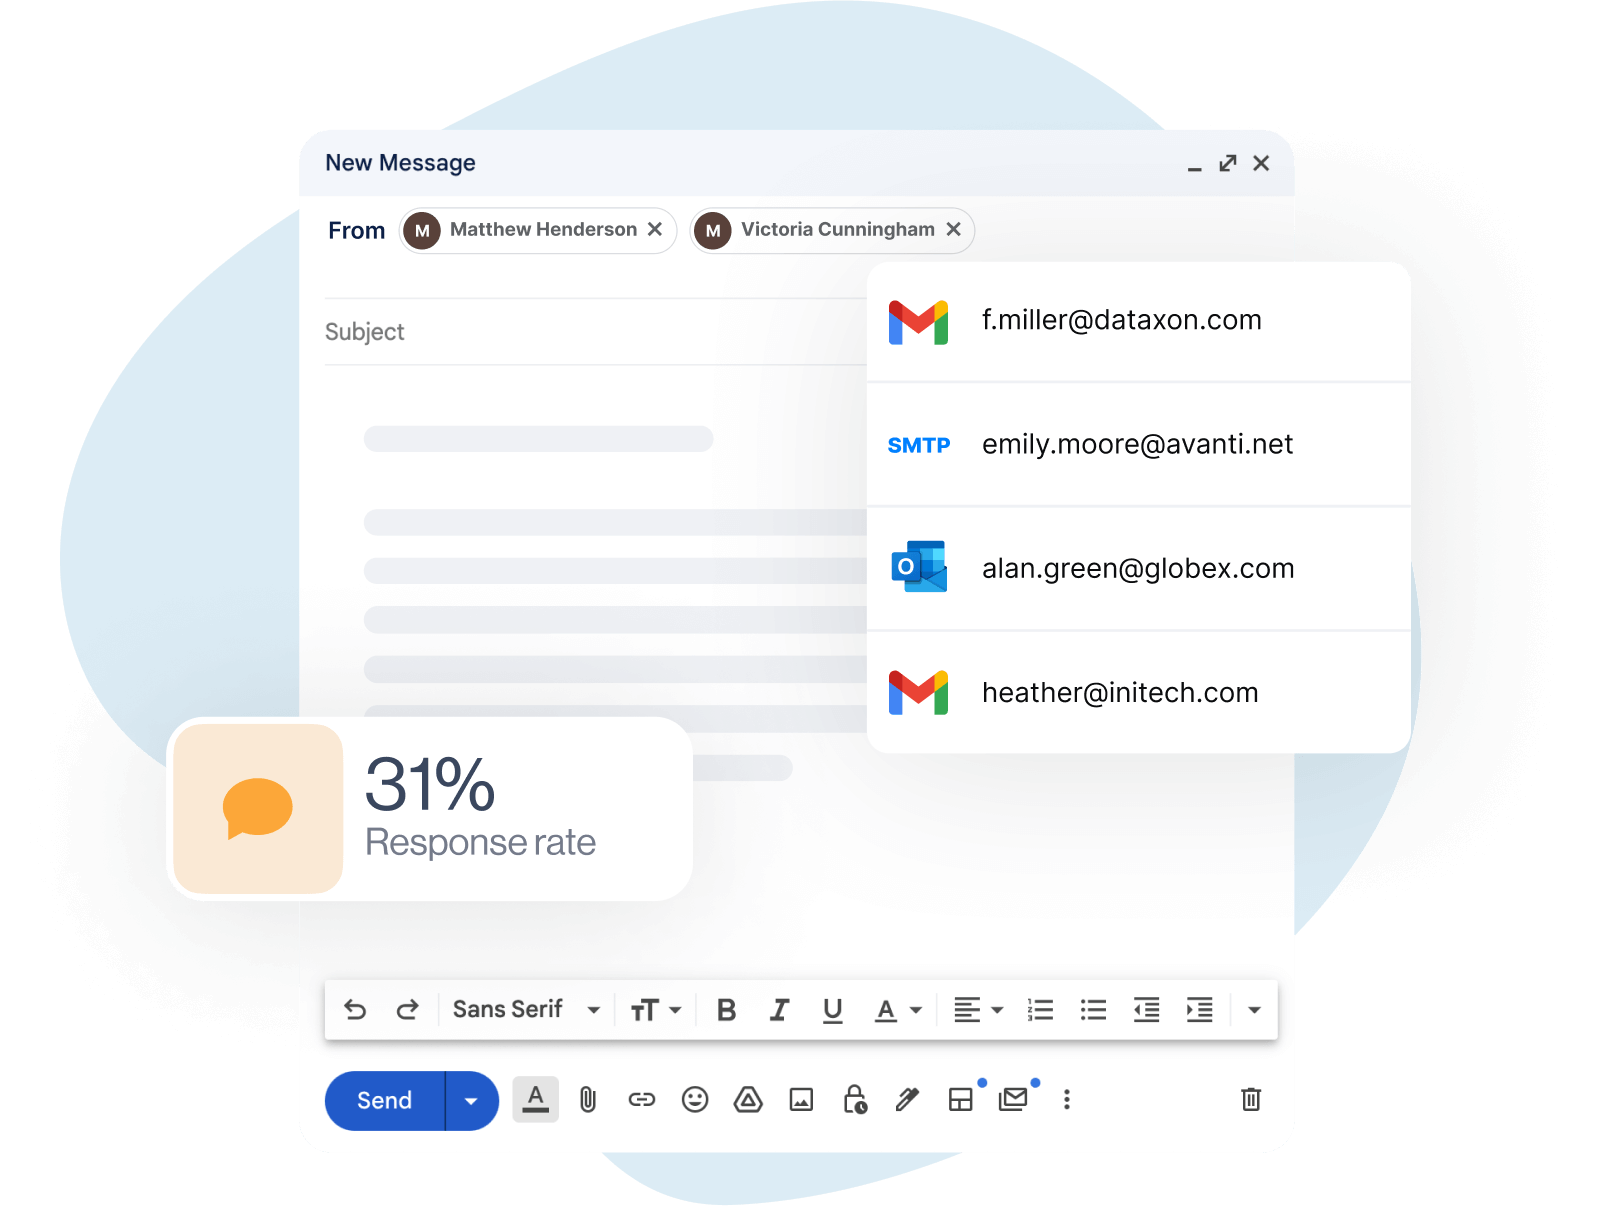 Image of email mockup with emails from different providers users can add and use for inbox rotation and a card with 31% response rate